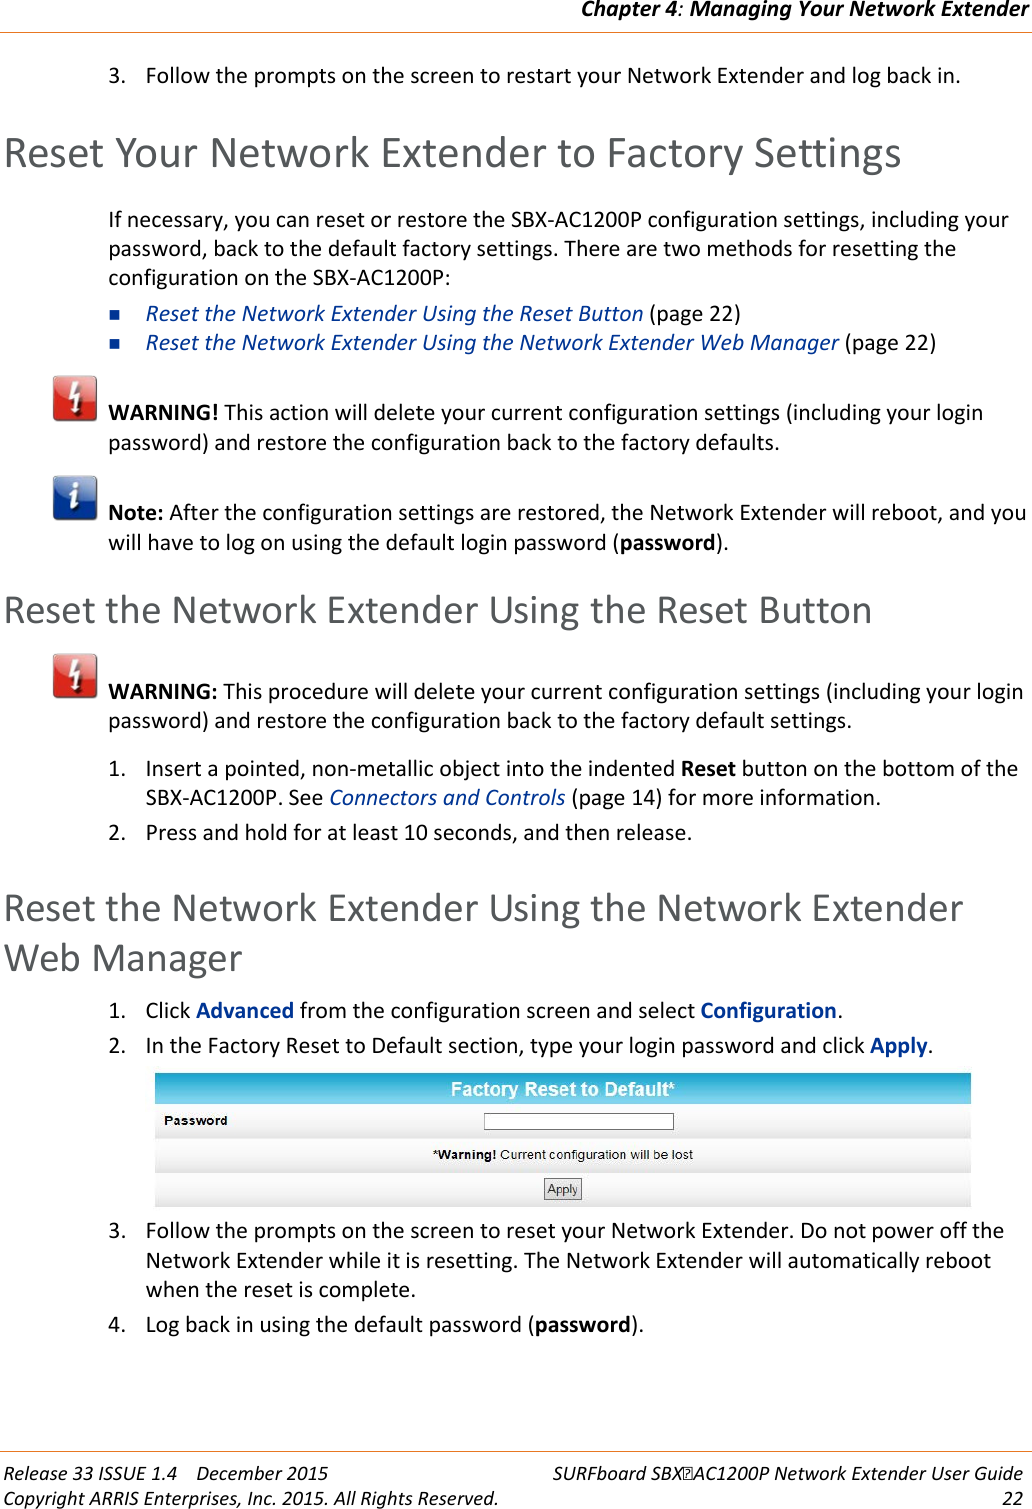 Chapter 4: Managing Your Network Extender  Release 33 ISSUE 1.4    December 2015 SURFboard SBXAC1200P Network Extender User Guide Copyright ARRIS Enterprises, Inc. 2015. All Rights Reserved. 22  3. Follow the prompts on the screen to restart your Network Extender and log back in.   Reset Your Network Extender to Factory Settings If necessary, you can reset or restore the SBX-AC1200P configuration settings, including your password, back to the default factory settings. There are two methods for resetting the configuration on the SBX-AC1200P:  Reset the Network Extender Using the Reset Button (page 22)  Reset the Network Extender Using the Network Extender Web Manager (page 22)  WARNING! This action will delete your current configuration settings (including your login password) and restore the configuration back to the factory defaults.  Note: After the configuration settings are restored, the Network Extender will reboot, and you will have to log on using the default login password (password).   Reset the Network Extender Using the Reset Button  WARNING: This procedure will delete your current configuration settings (including your login password) and restore the configuration back to the factory default settings. 1. Insert a pointed, non-metallic object into the indented Reset button on the bottom of the SBX-AC1200P. See Connectors and Controls (page 14) for more information. 2. Press and hold for at least 10 seconds, and then release.   Reset the Network Extender Using the Network Extender Web Manager 1. Click Advanced from the configuration screen and select Configuration. 2. In the Factory Reset to Default section, type your login password and click Apply.  3. Follow the prompts on the screen to reset your Network Extender. Do not power off the Network Extender while it is resetting. The Network Extender will automatically reboot when the reset is complete. 4. Log back in using the default password (password).   